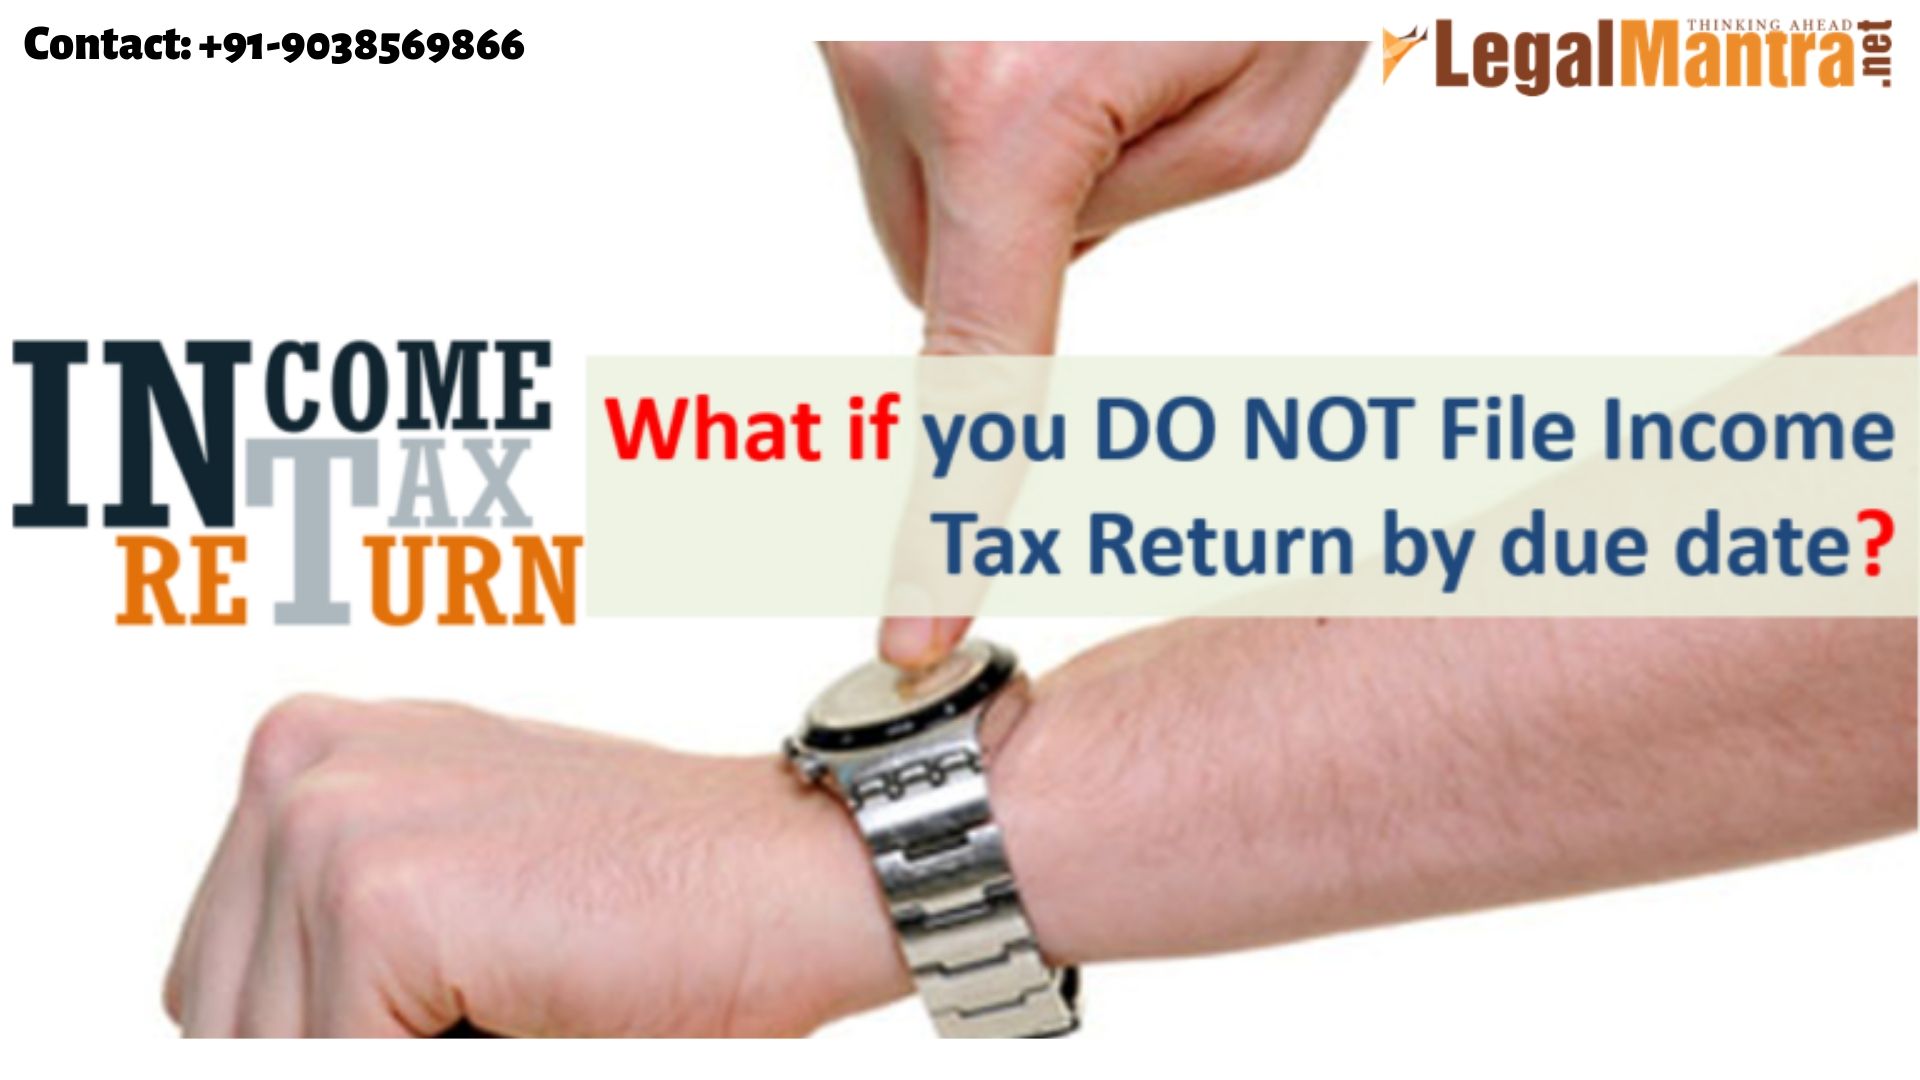 What if The Income Tax Returns is not filed within Due Date?